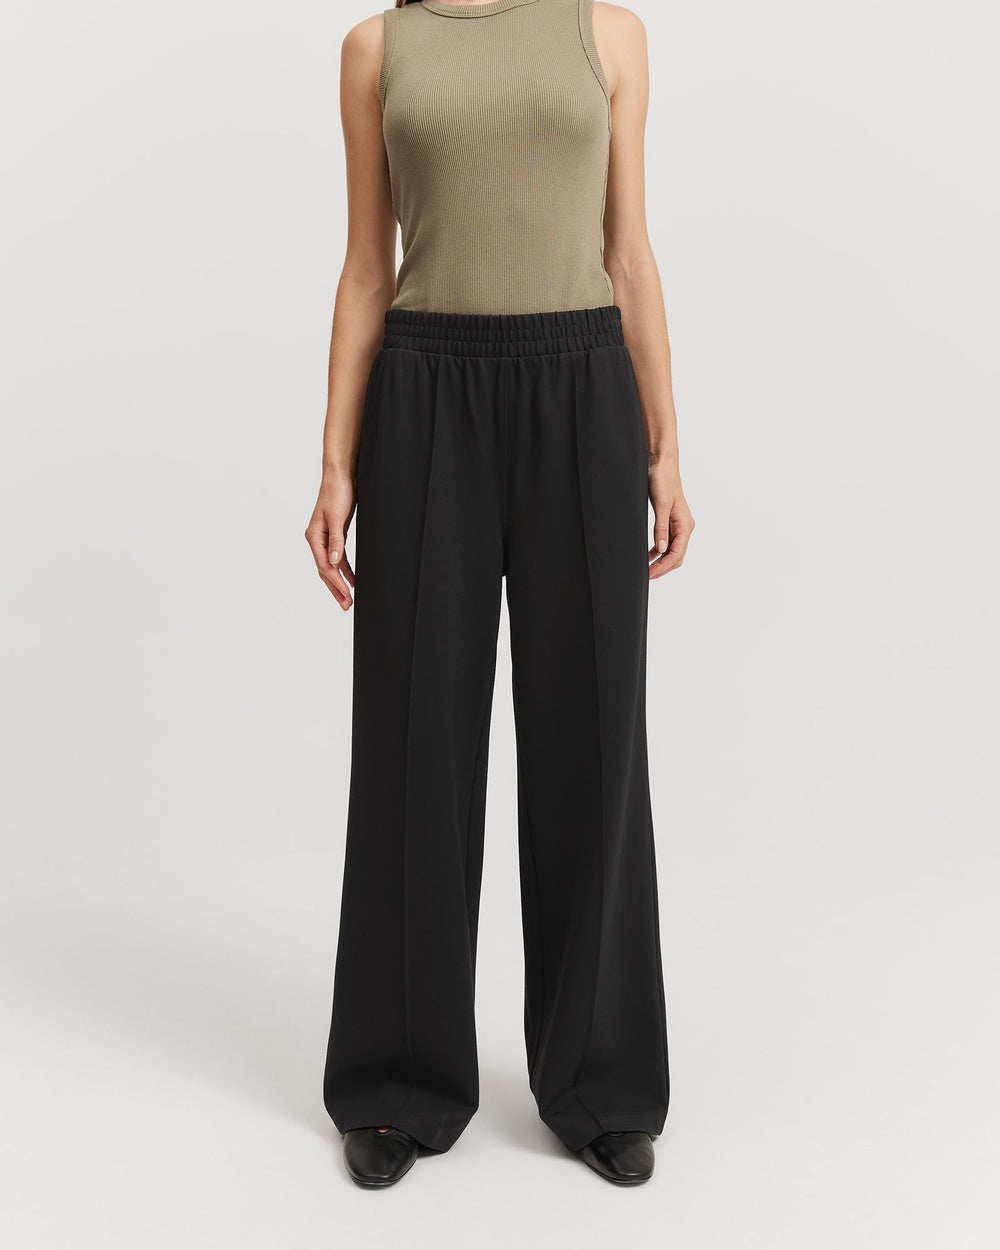 Comfortable wide leg pants for WFH and running errands